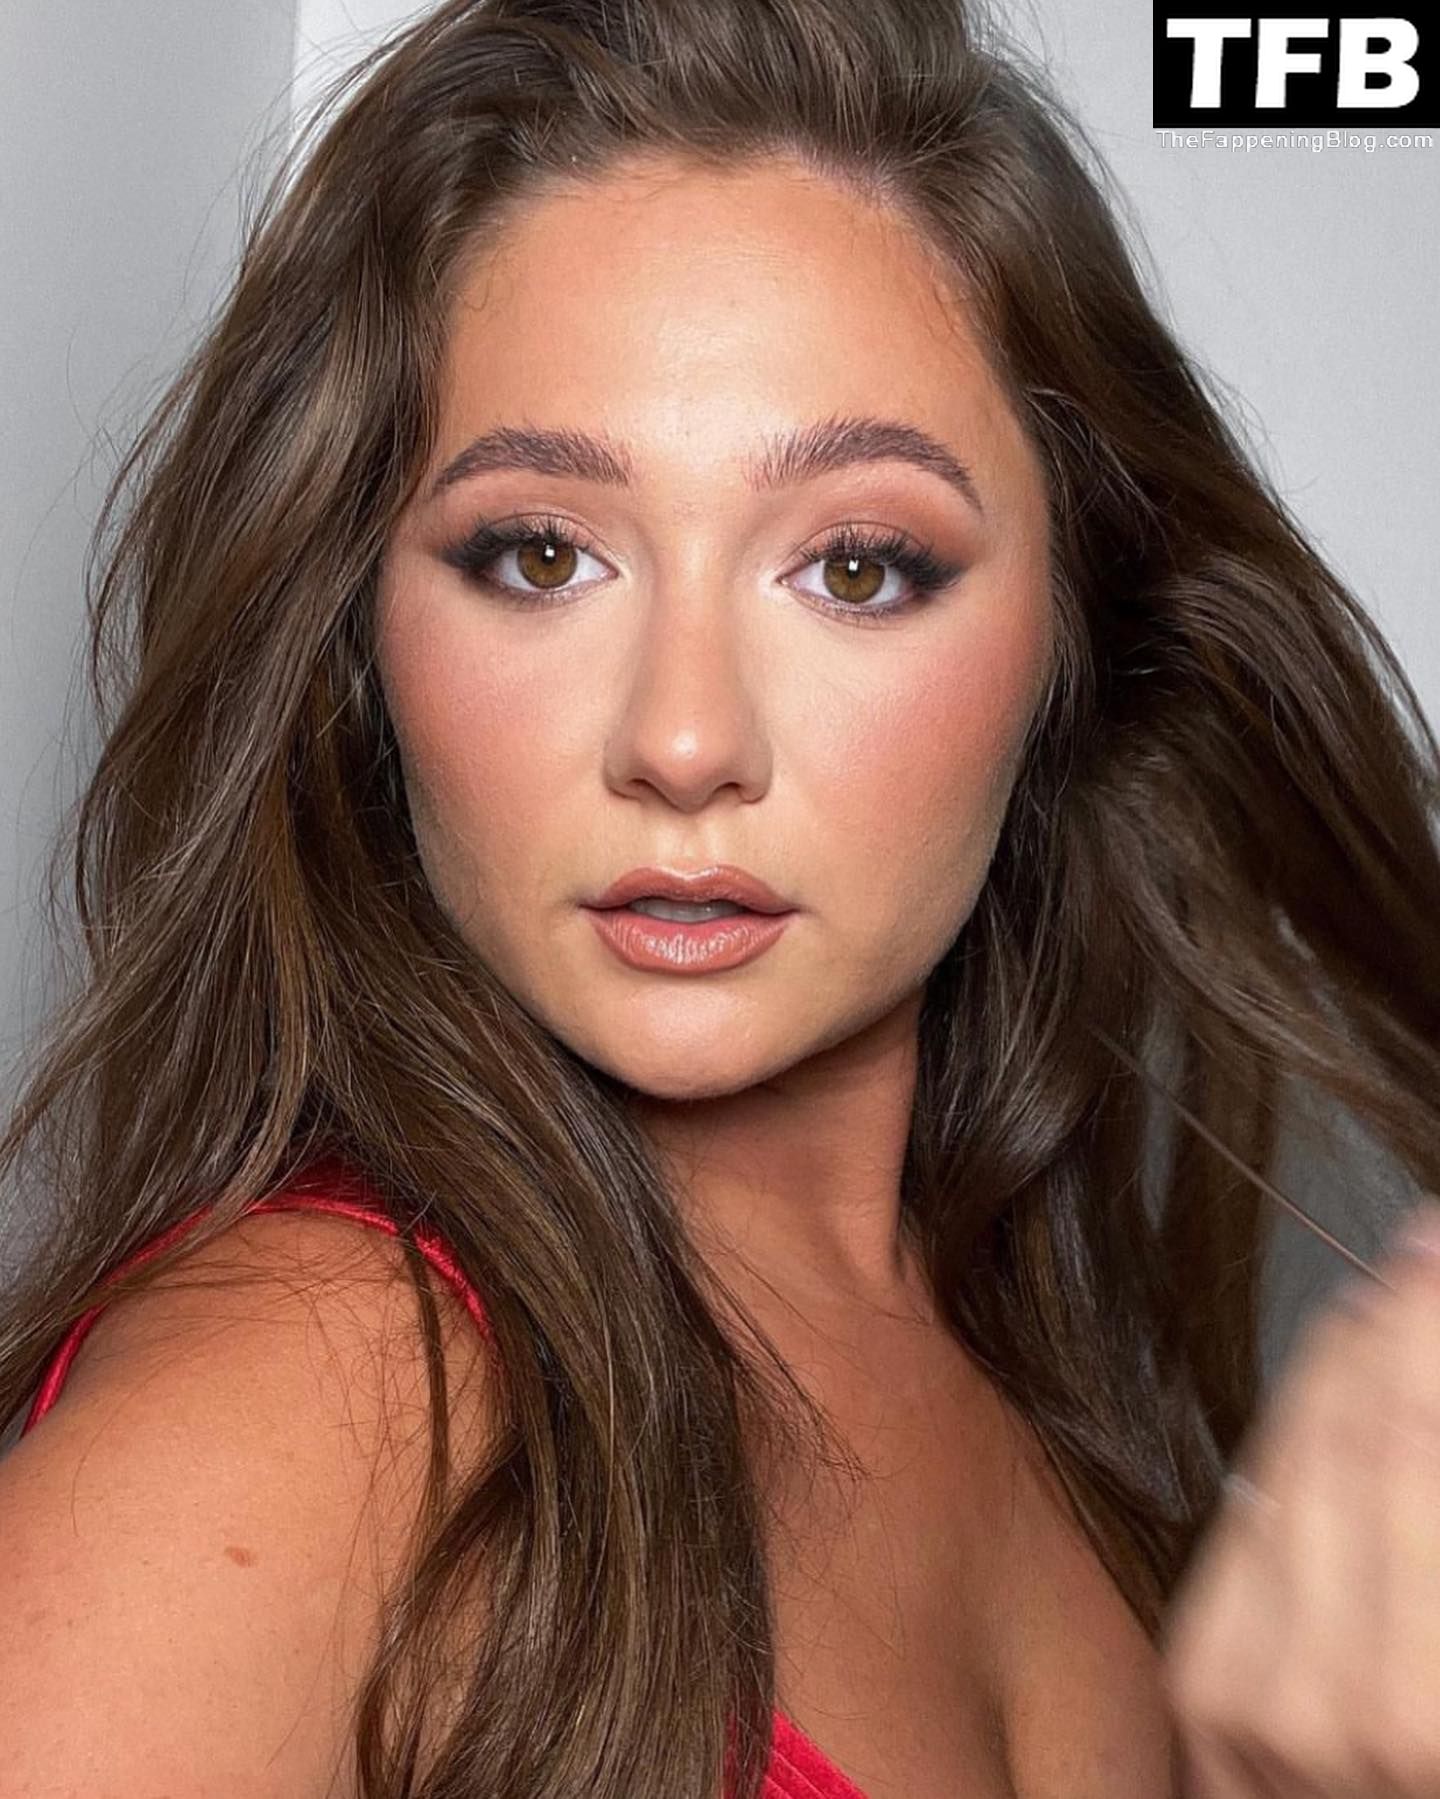 Emma-Kenney-Sexy-The-Fappening-Blog-8.jpg